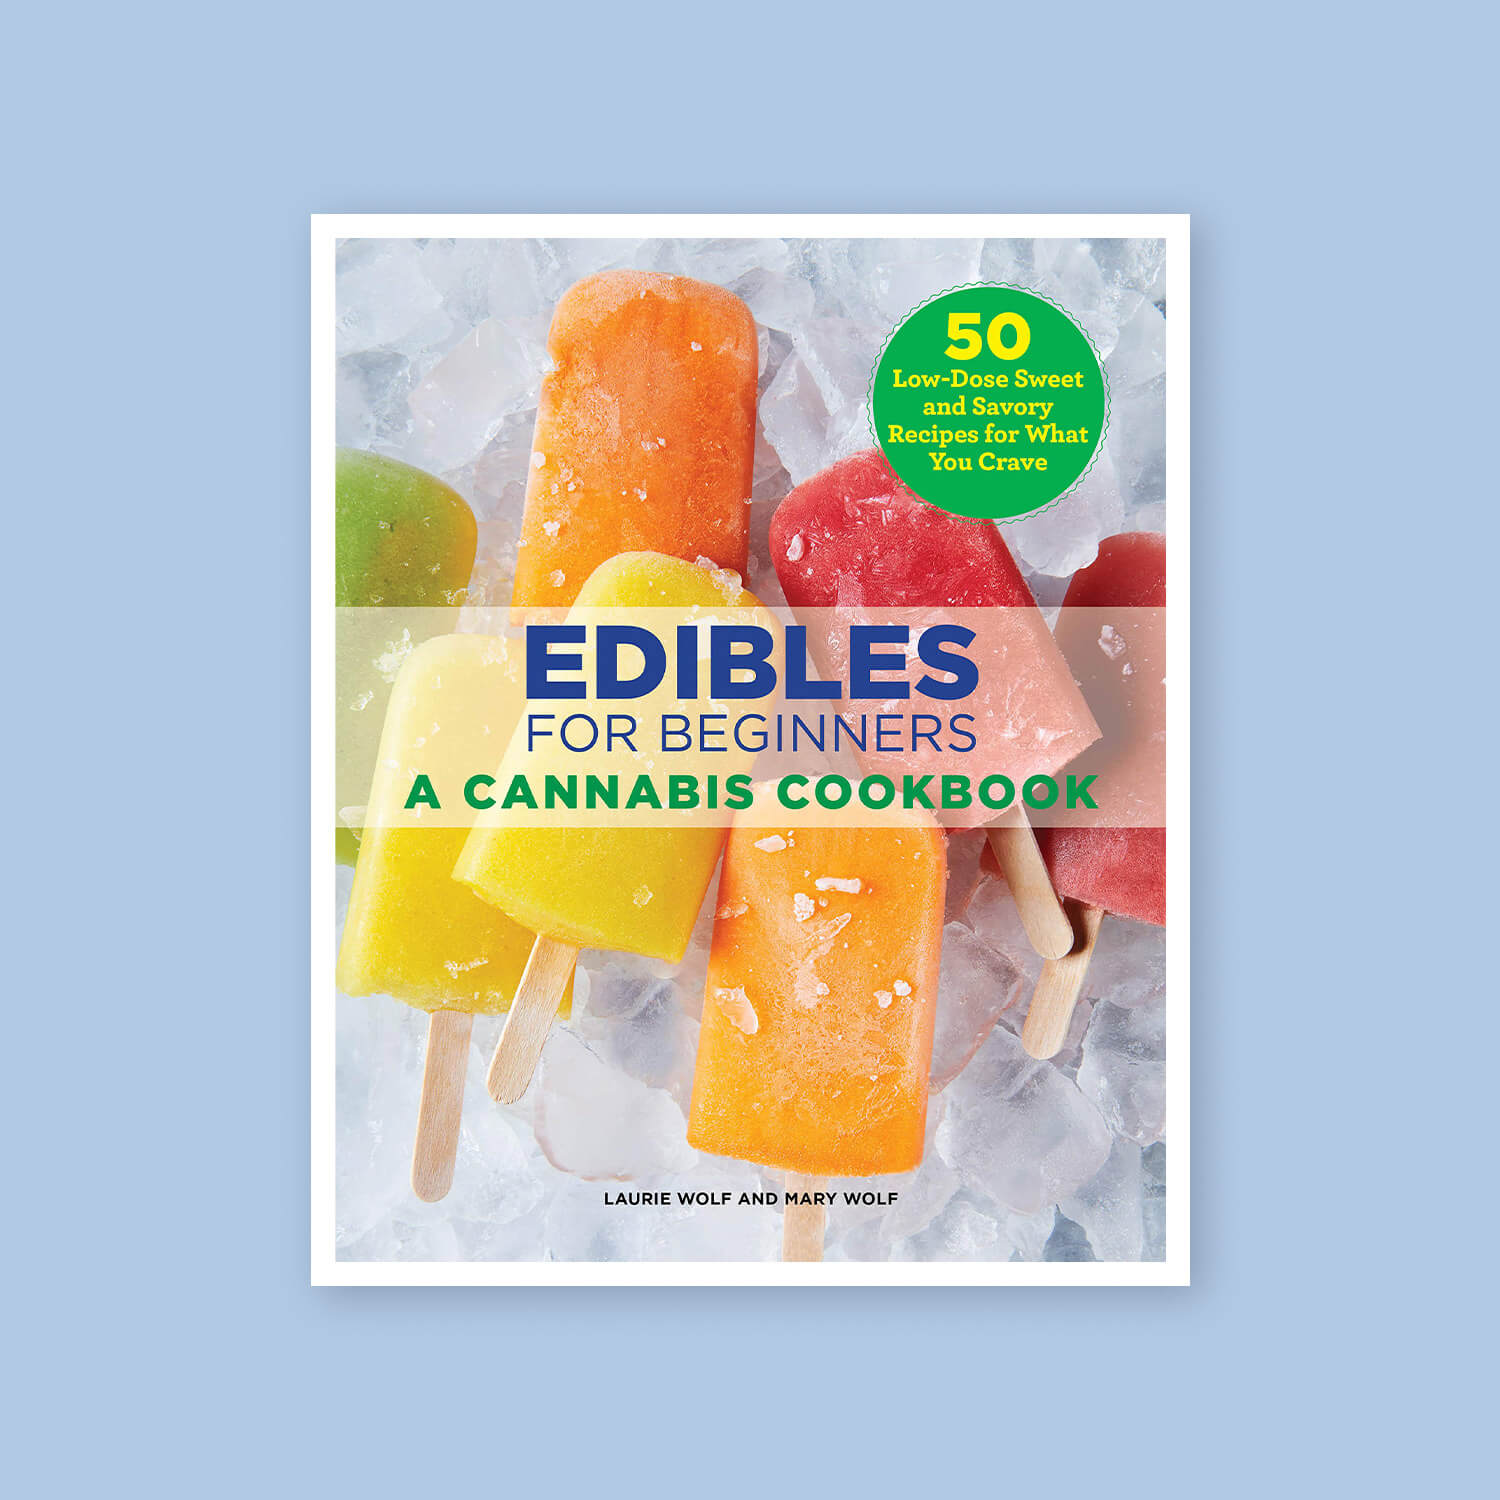 Edibles for Beginners